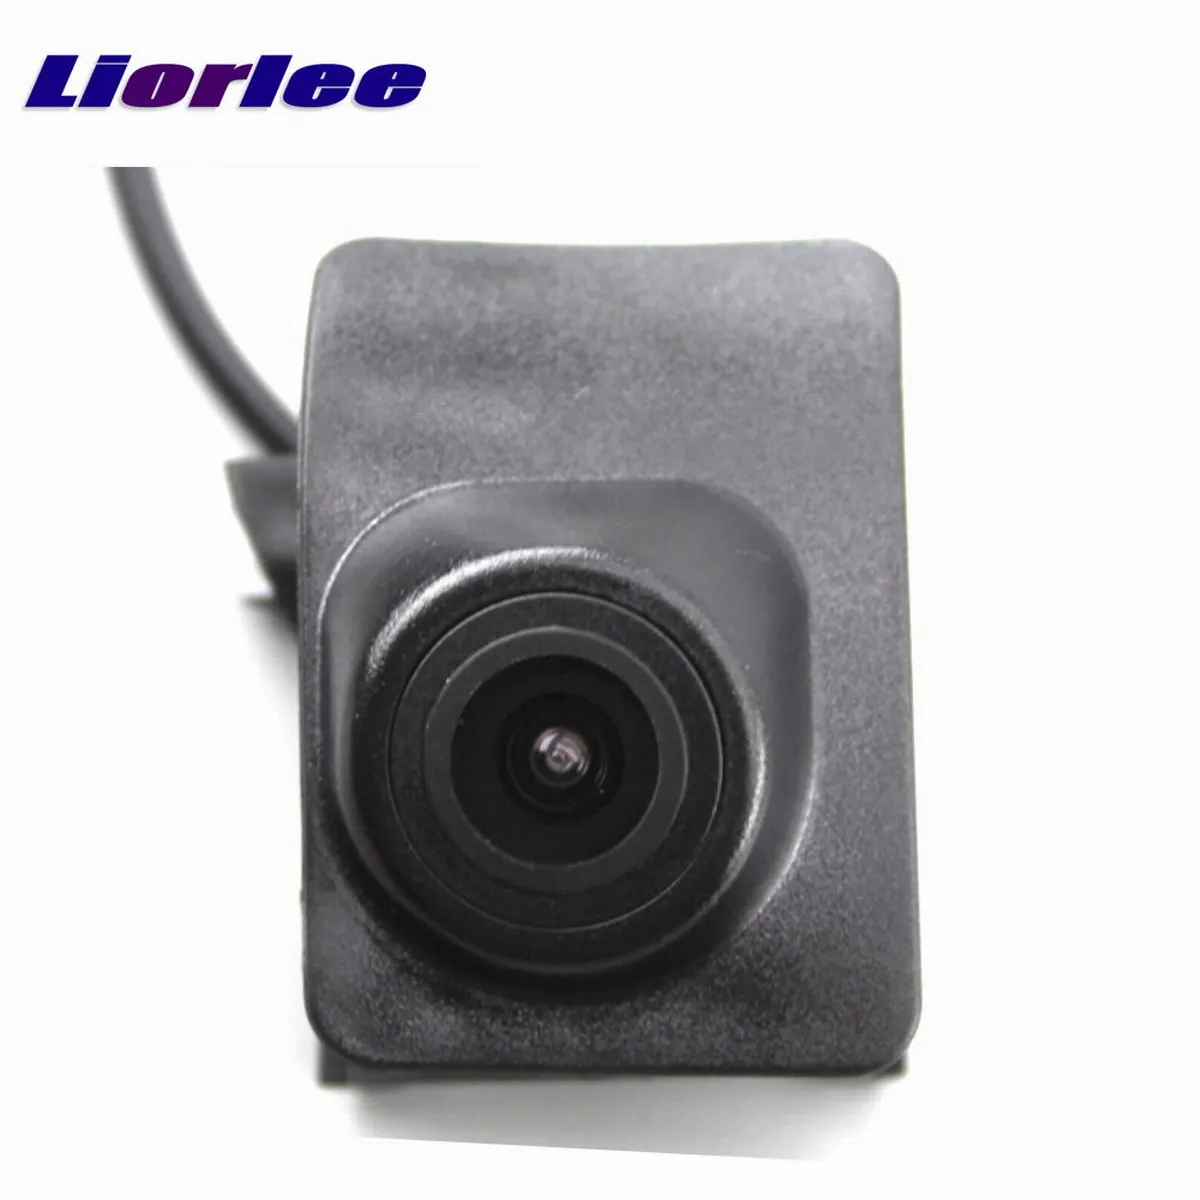 

Car Front View Logo Grill Camera For BMW 1 Series F20/F21 2016 Reverse Rear Cam Full HD Accessories